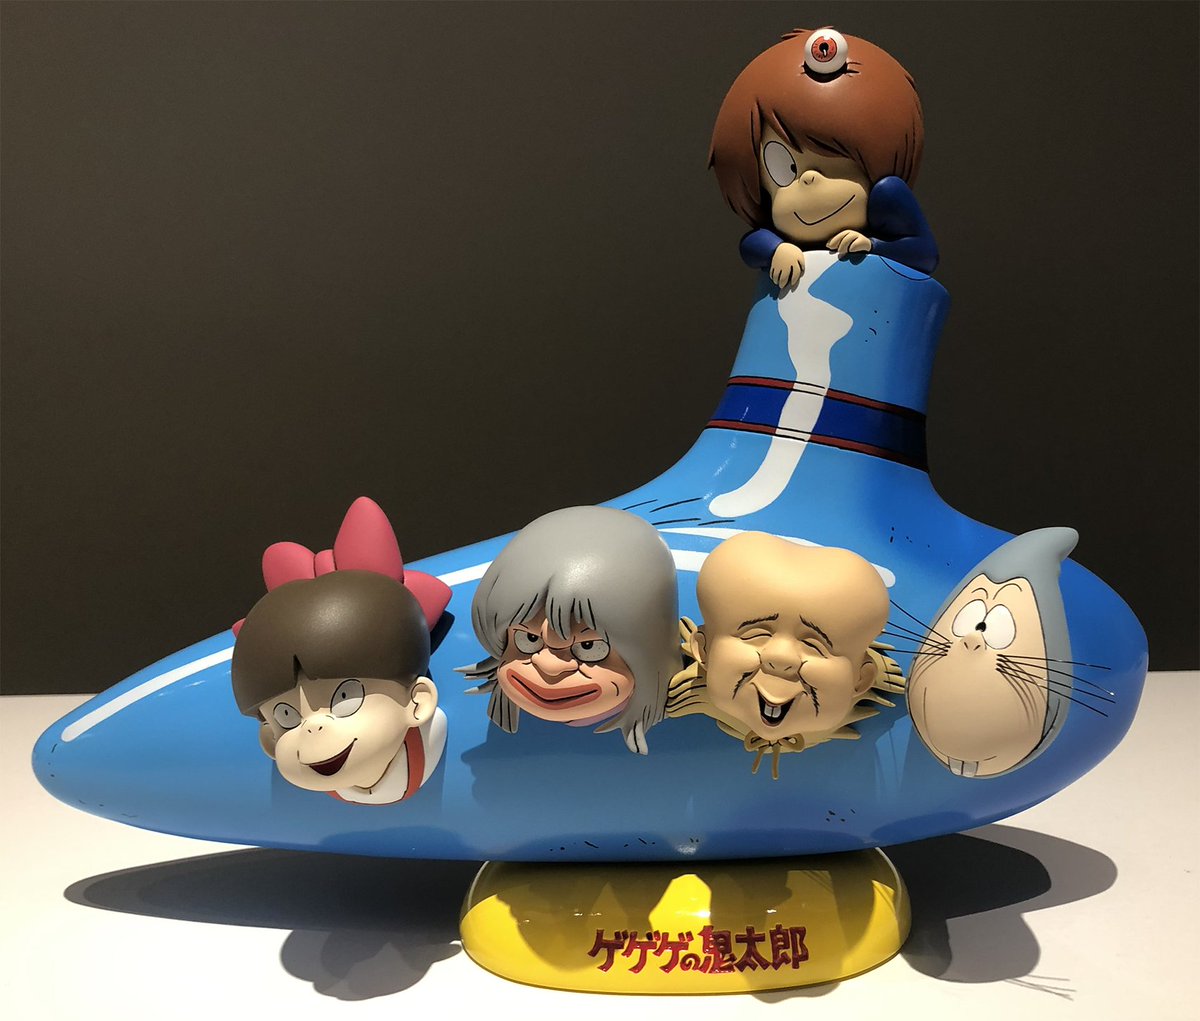 I went to the Gegege no Kitaro expo in Ikebukuro. The first part is devoted to the history of the TV series, but the second part is filled with tributes from various artists, and it was really cool. A must for Kitaro fans who happen to be in Tokyo right now.